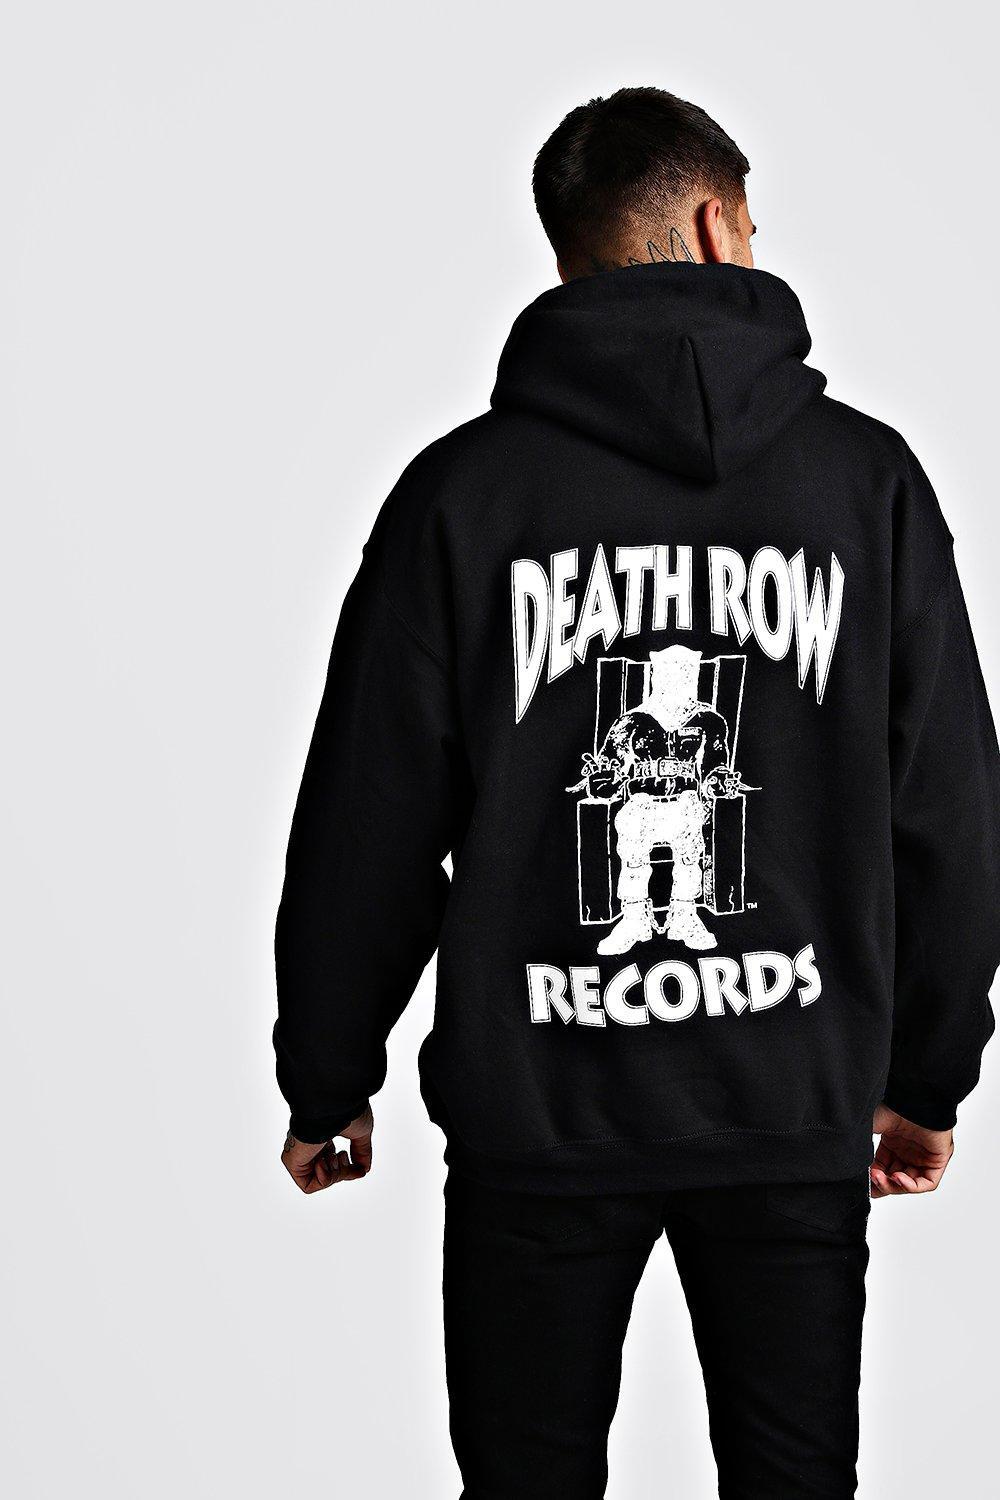 BoohooMAN Oversized Death Row License Hoodie in Black for Men - Lyst